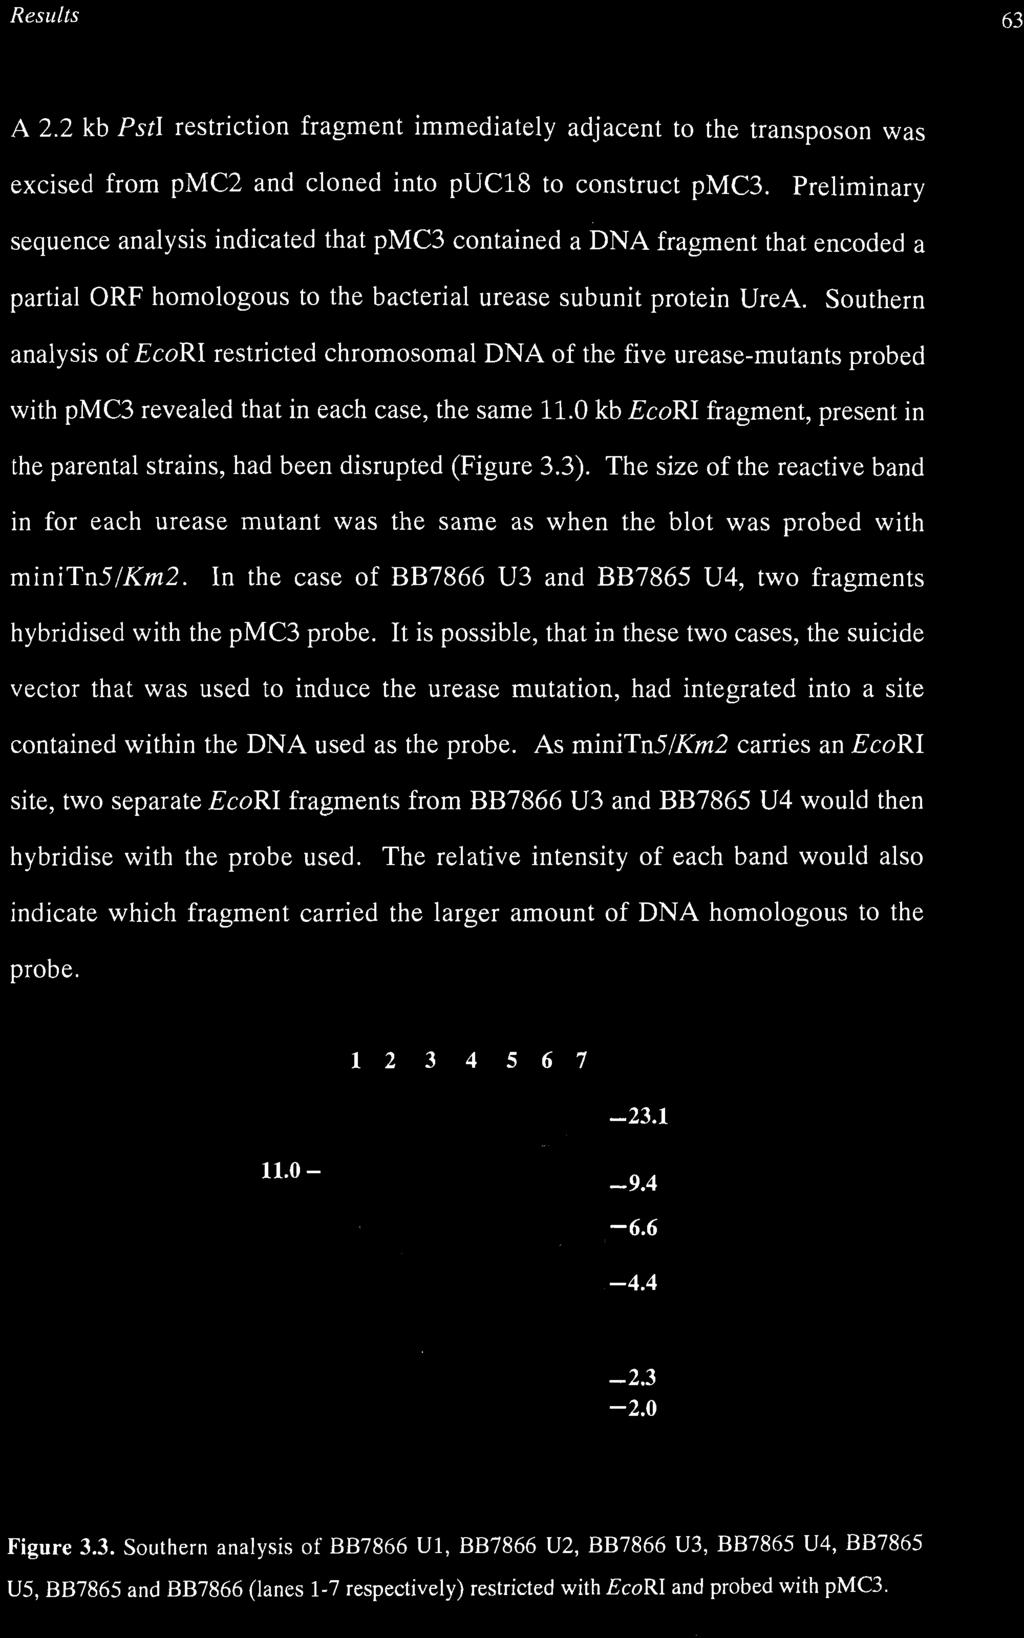 Southern analysis of EcoRI restricted chromosomal DNA of the five urease-mutants probed with pmc3 revealed that in each case, the same 11.0 kb.